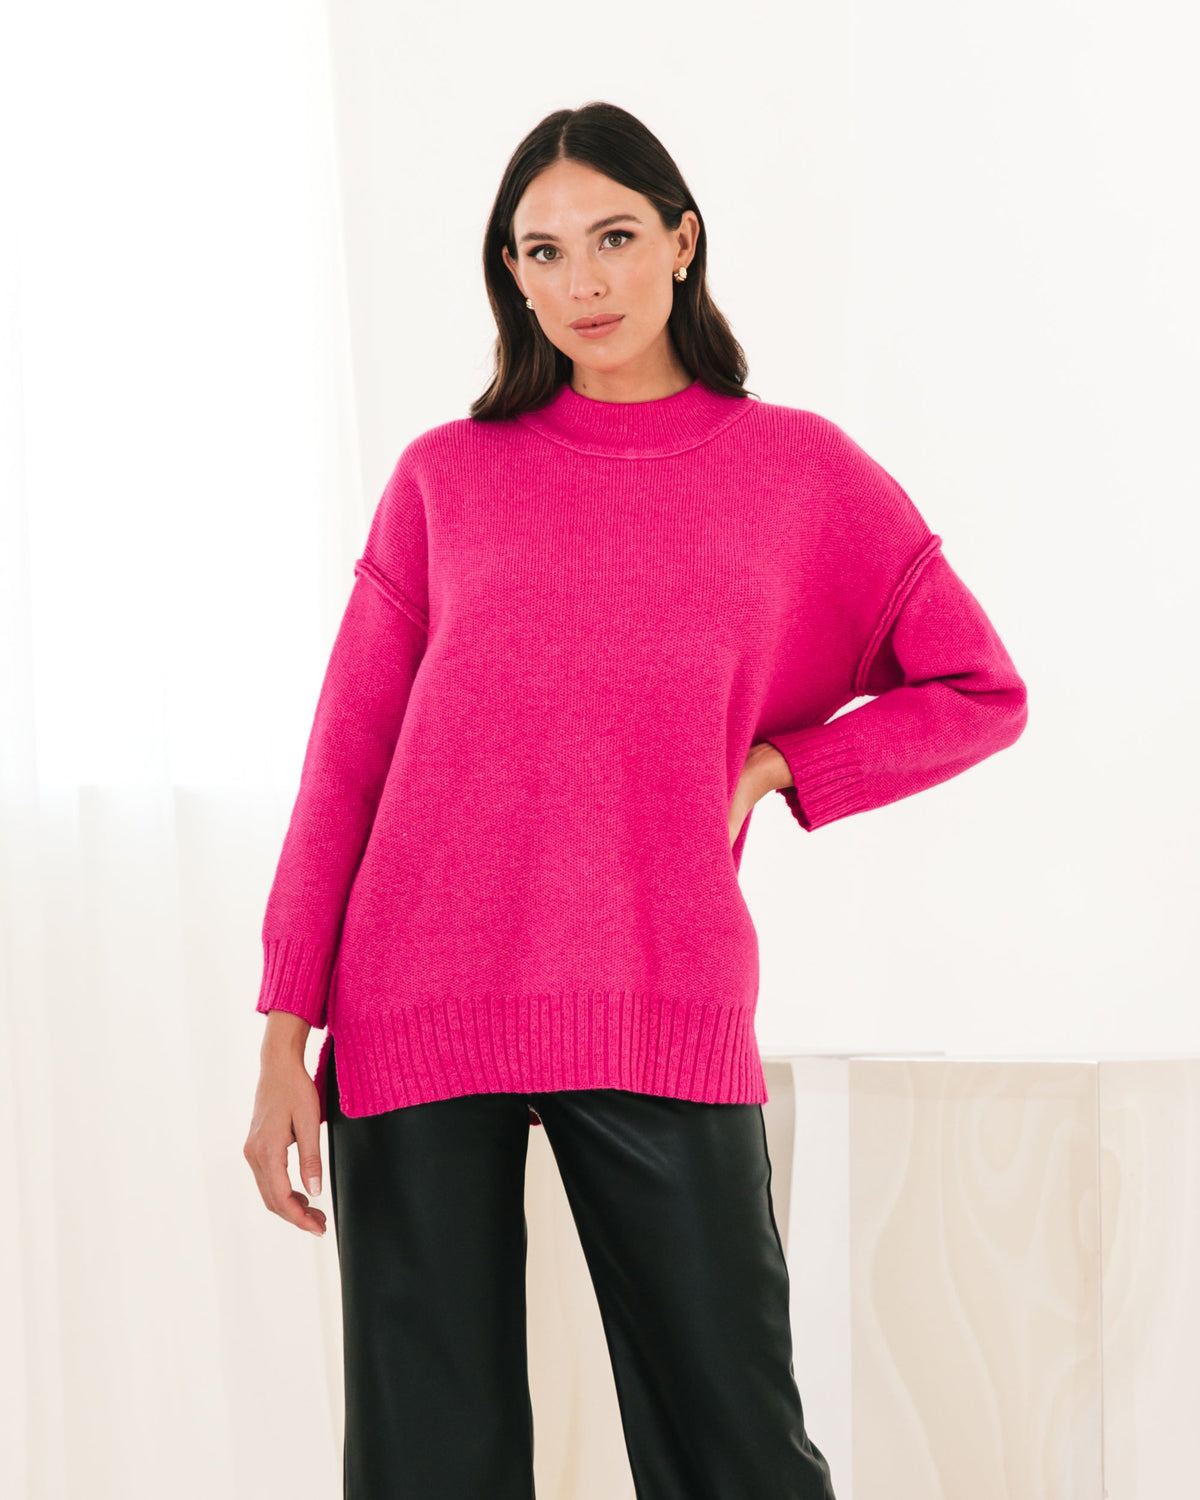 HOT PINK OVERSIZED FRONT SEAM KNIT JUMPER